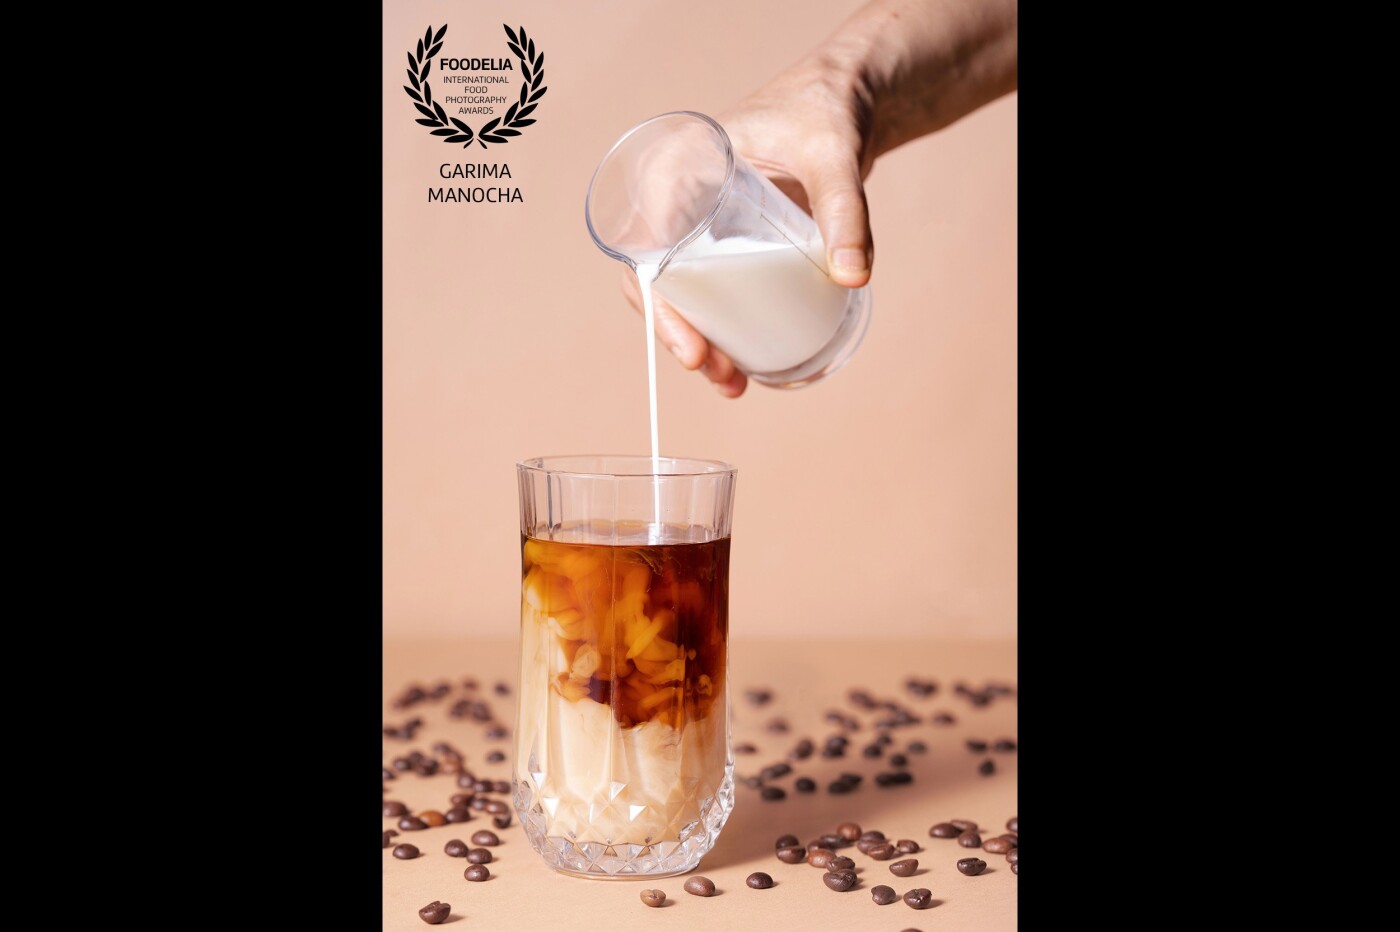 Shot some Cold Brew for the love of coffee, the pour adds a beautiful touch which makes the image dynamic & relatable. Colour Palette - soft with peach, white, and brown. Source of light - Hard, Diffused.